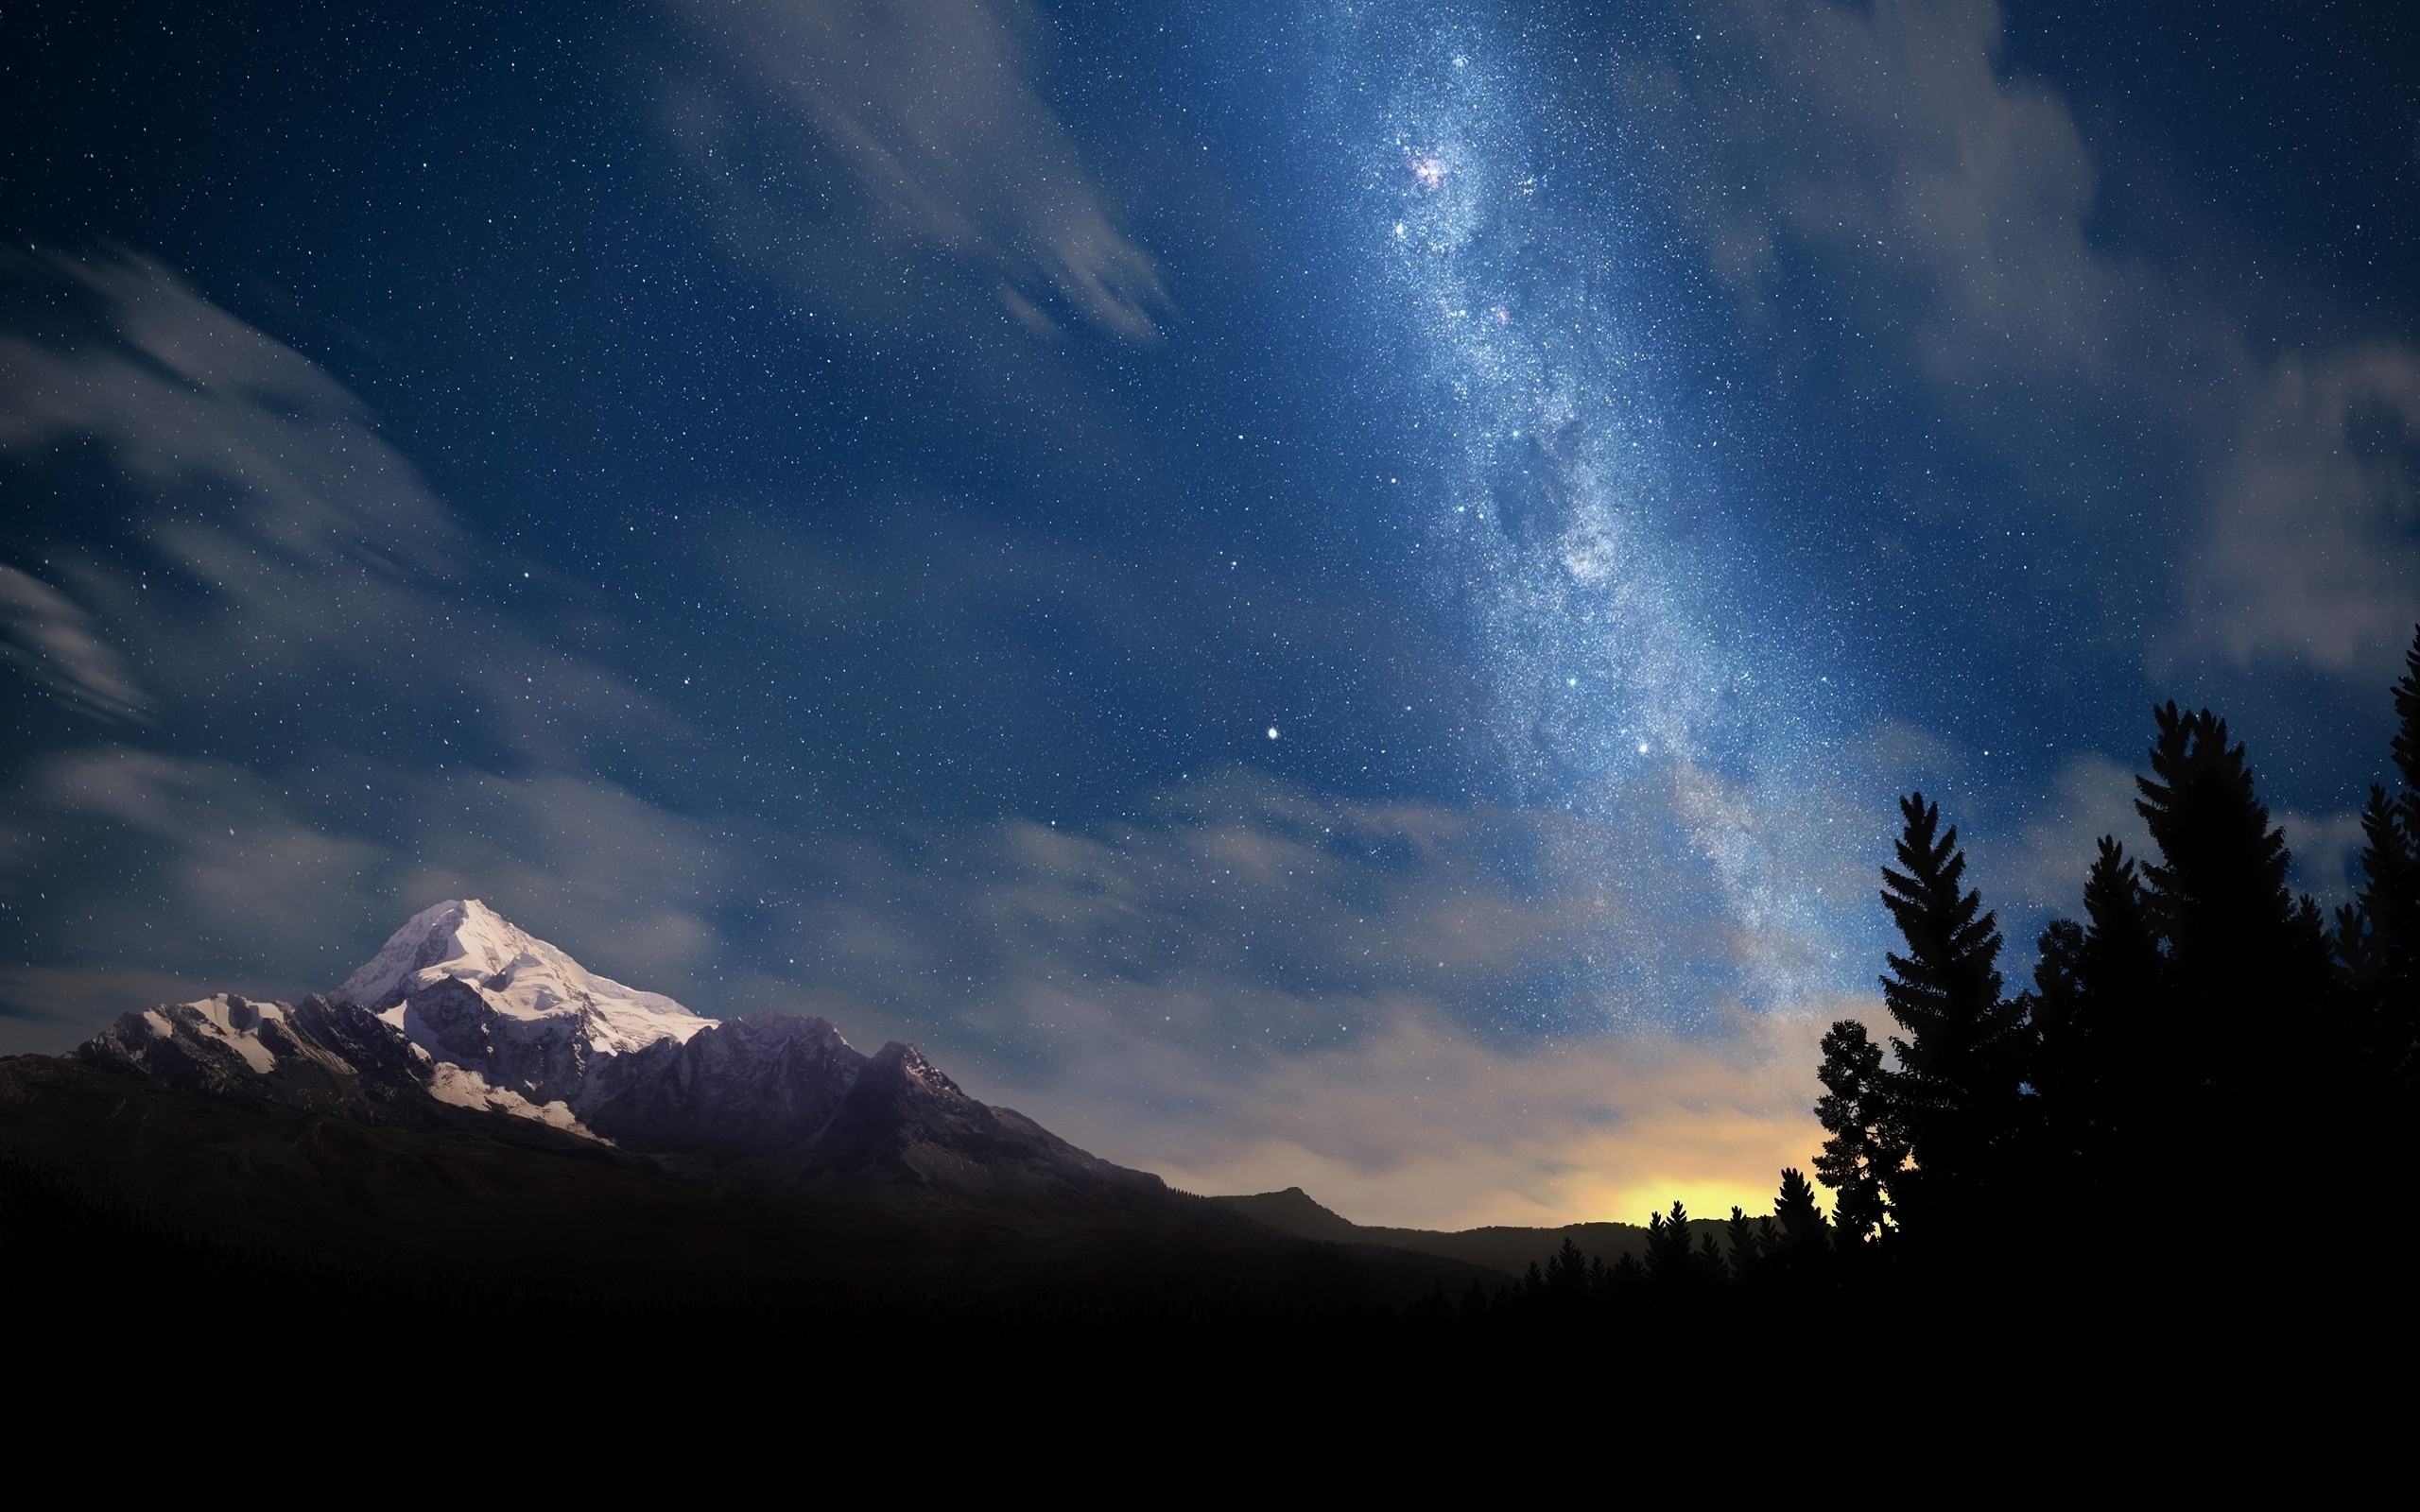 General 2560x1600 nature mountains trees stars space Milky Way starry night night landscape clouds long exposure galaxy sky dark